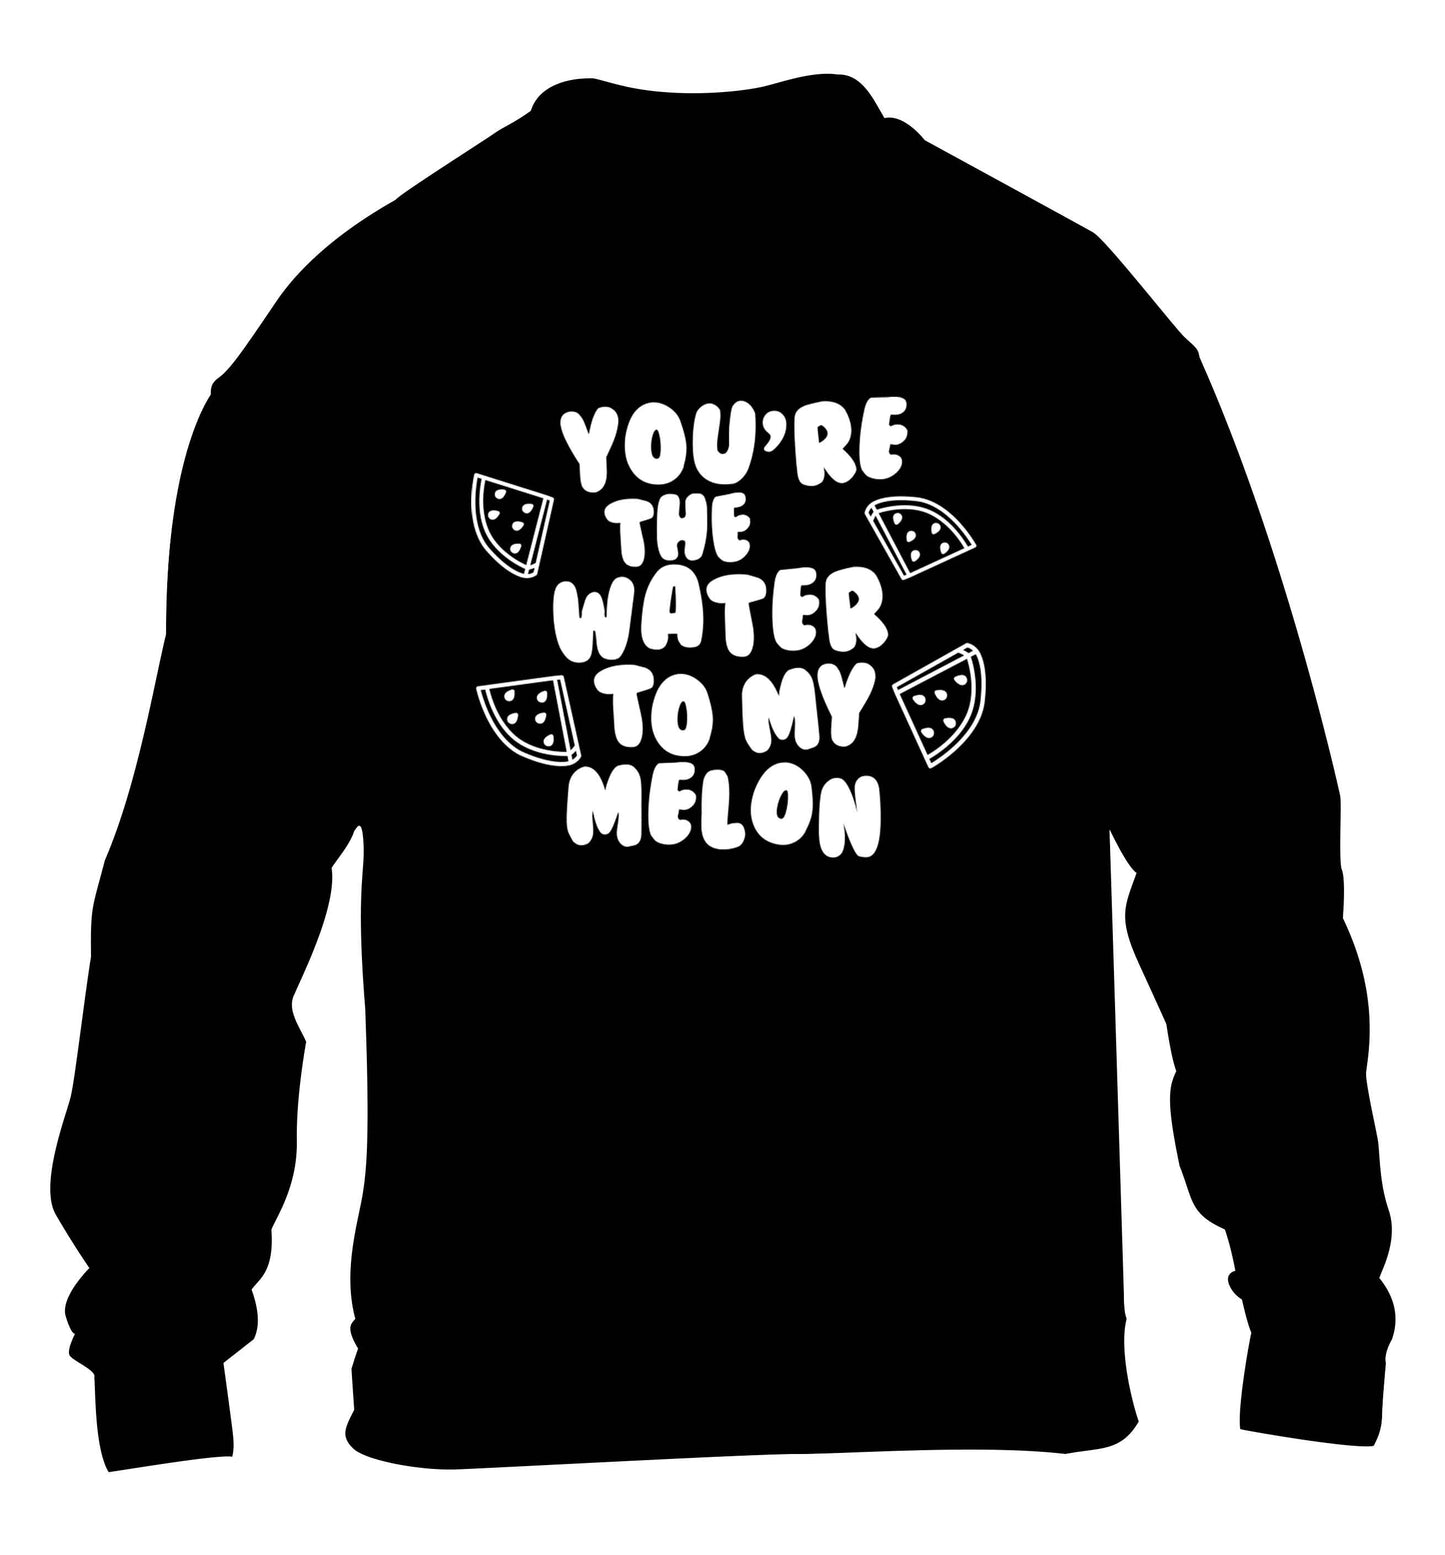 You're the water to my melon children's black sweater 12-13 Years